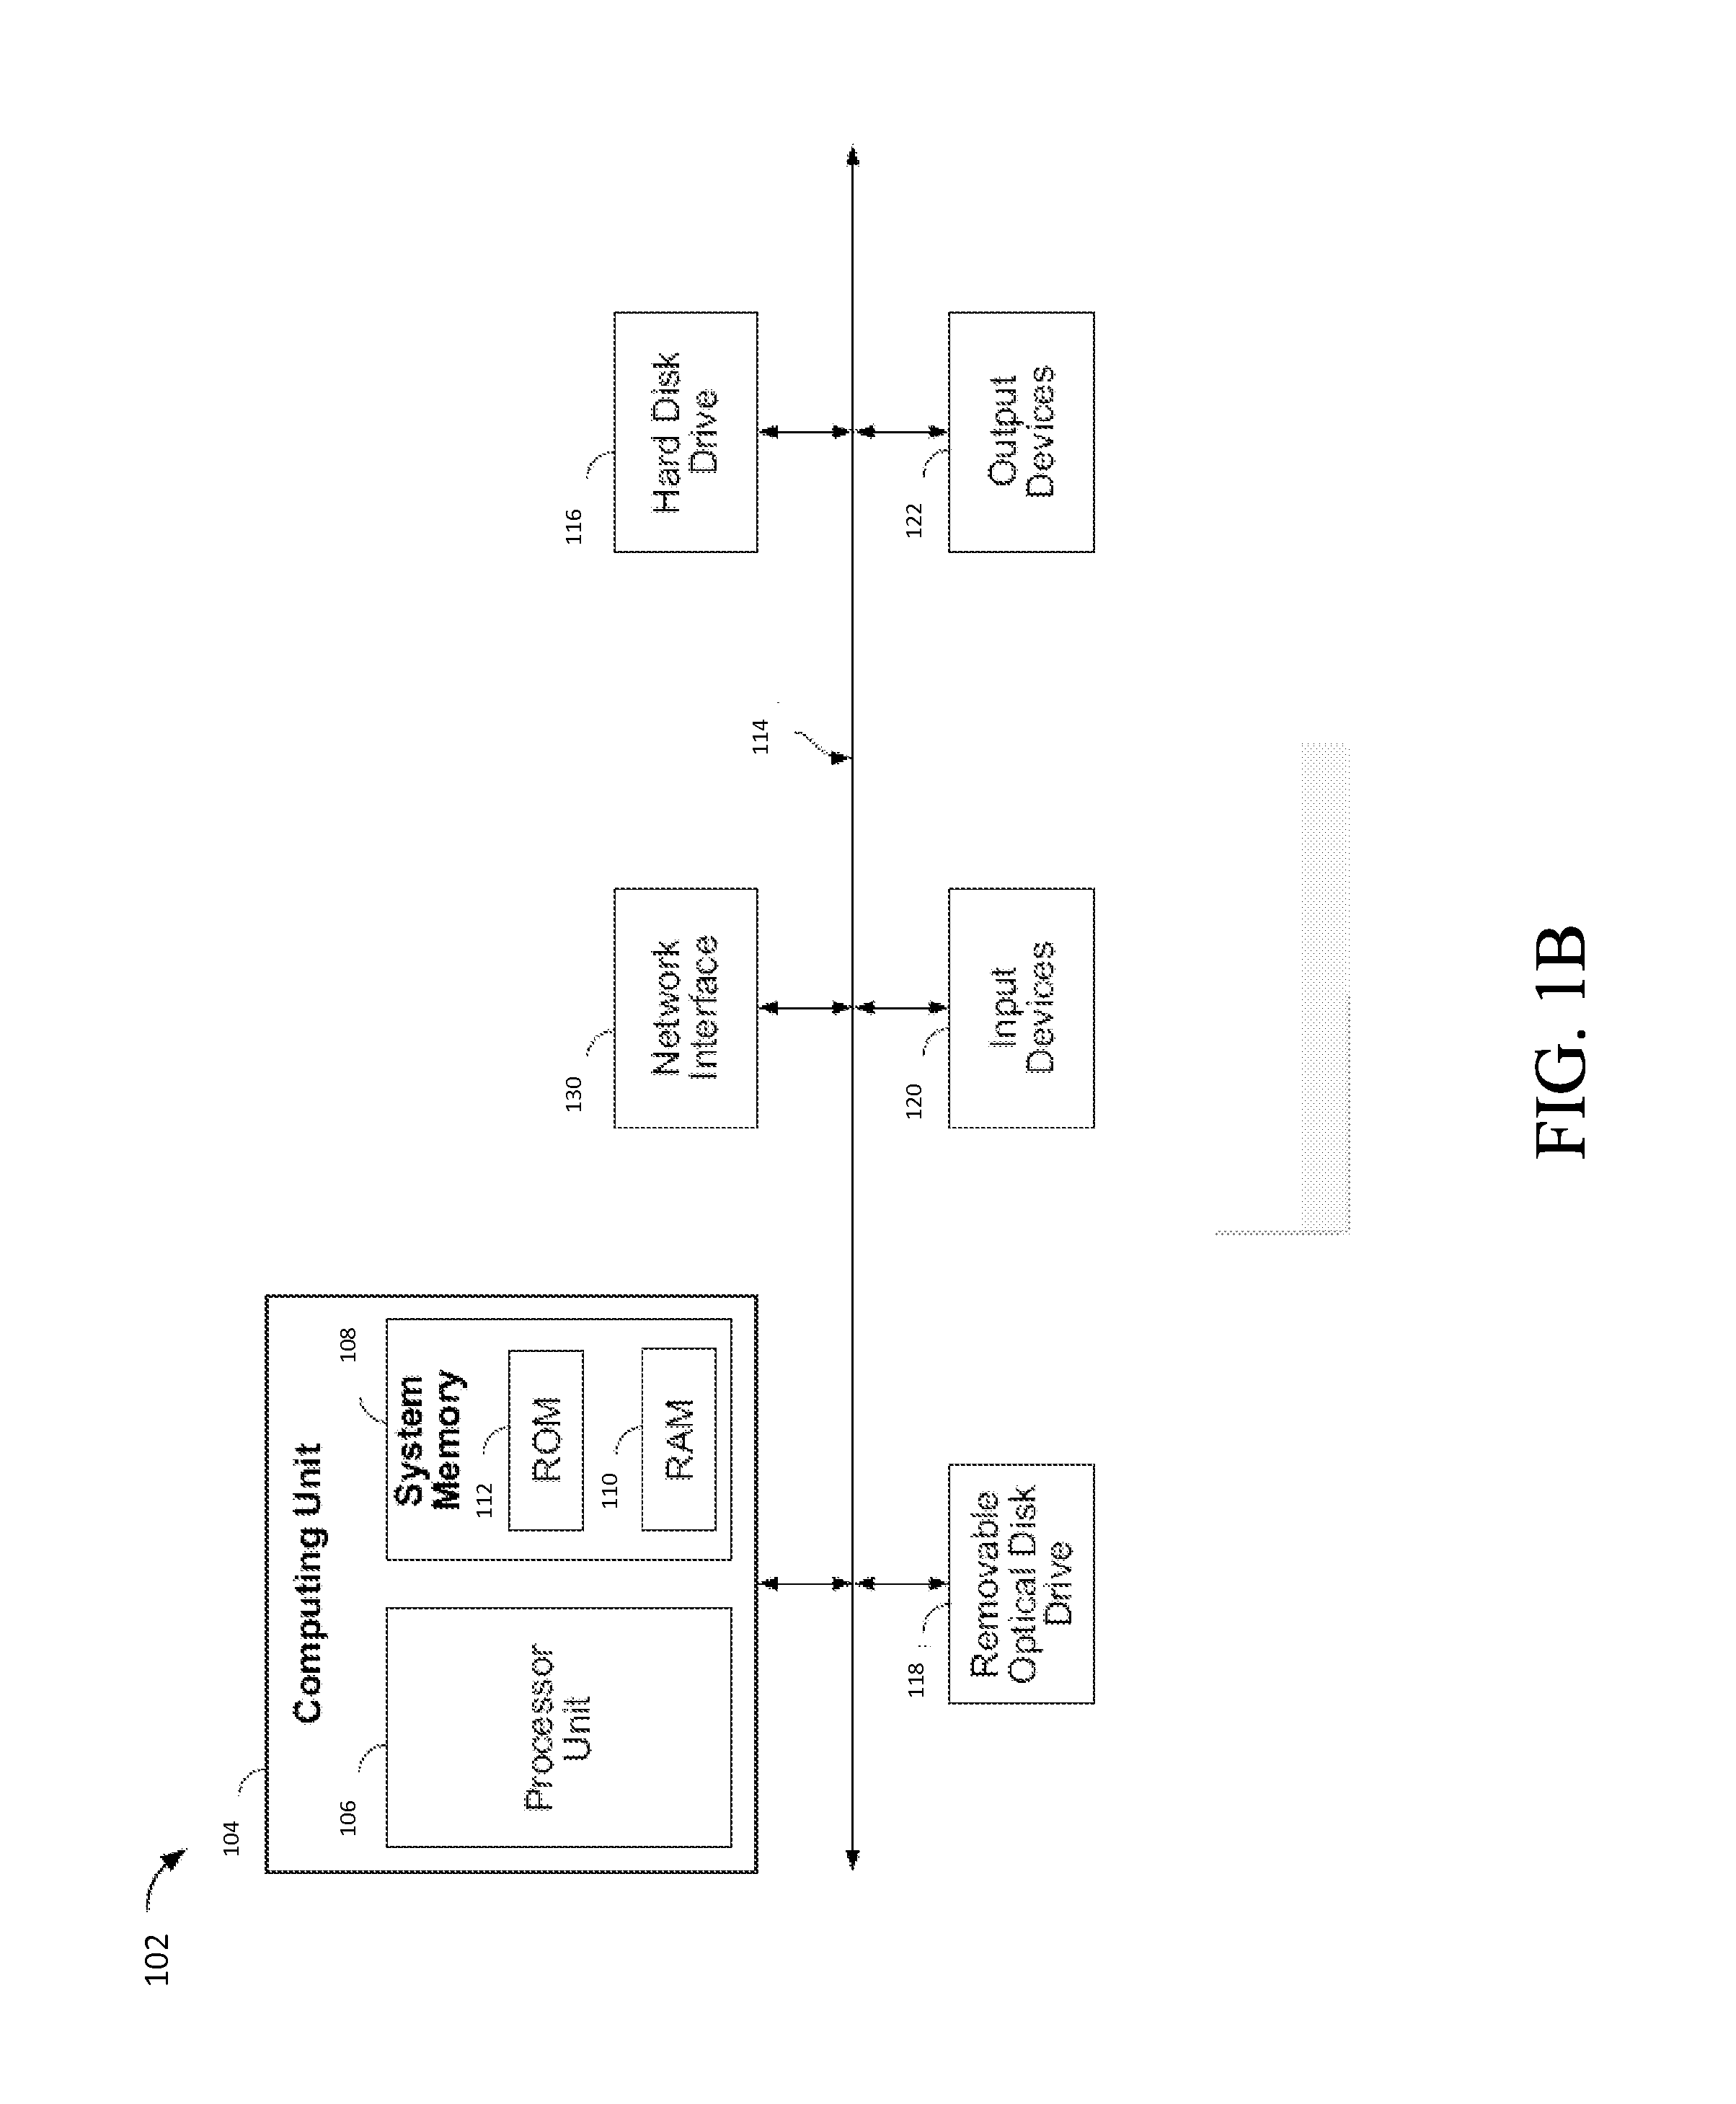 Action Detection and Activity Classification